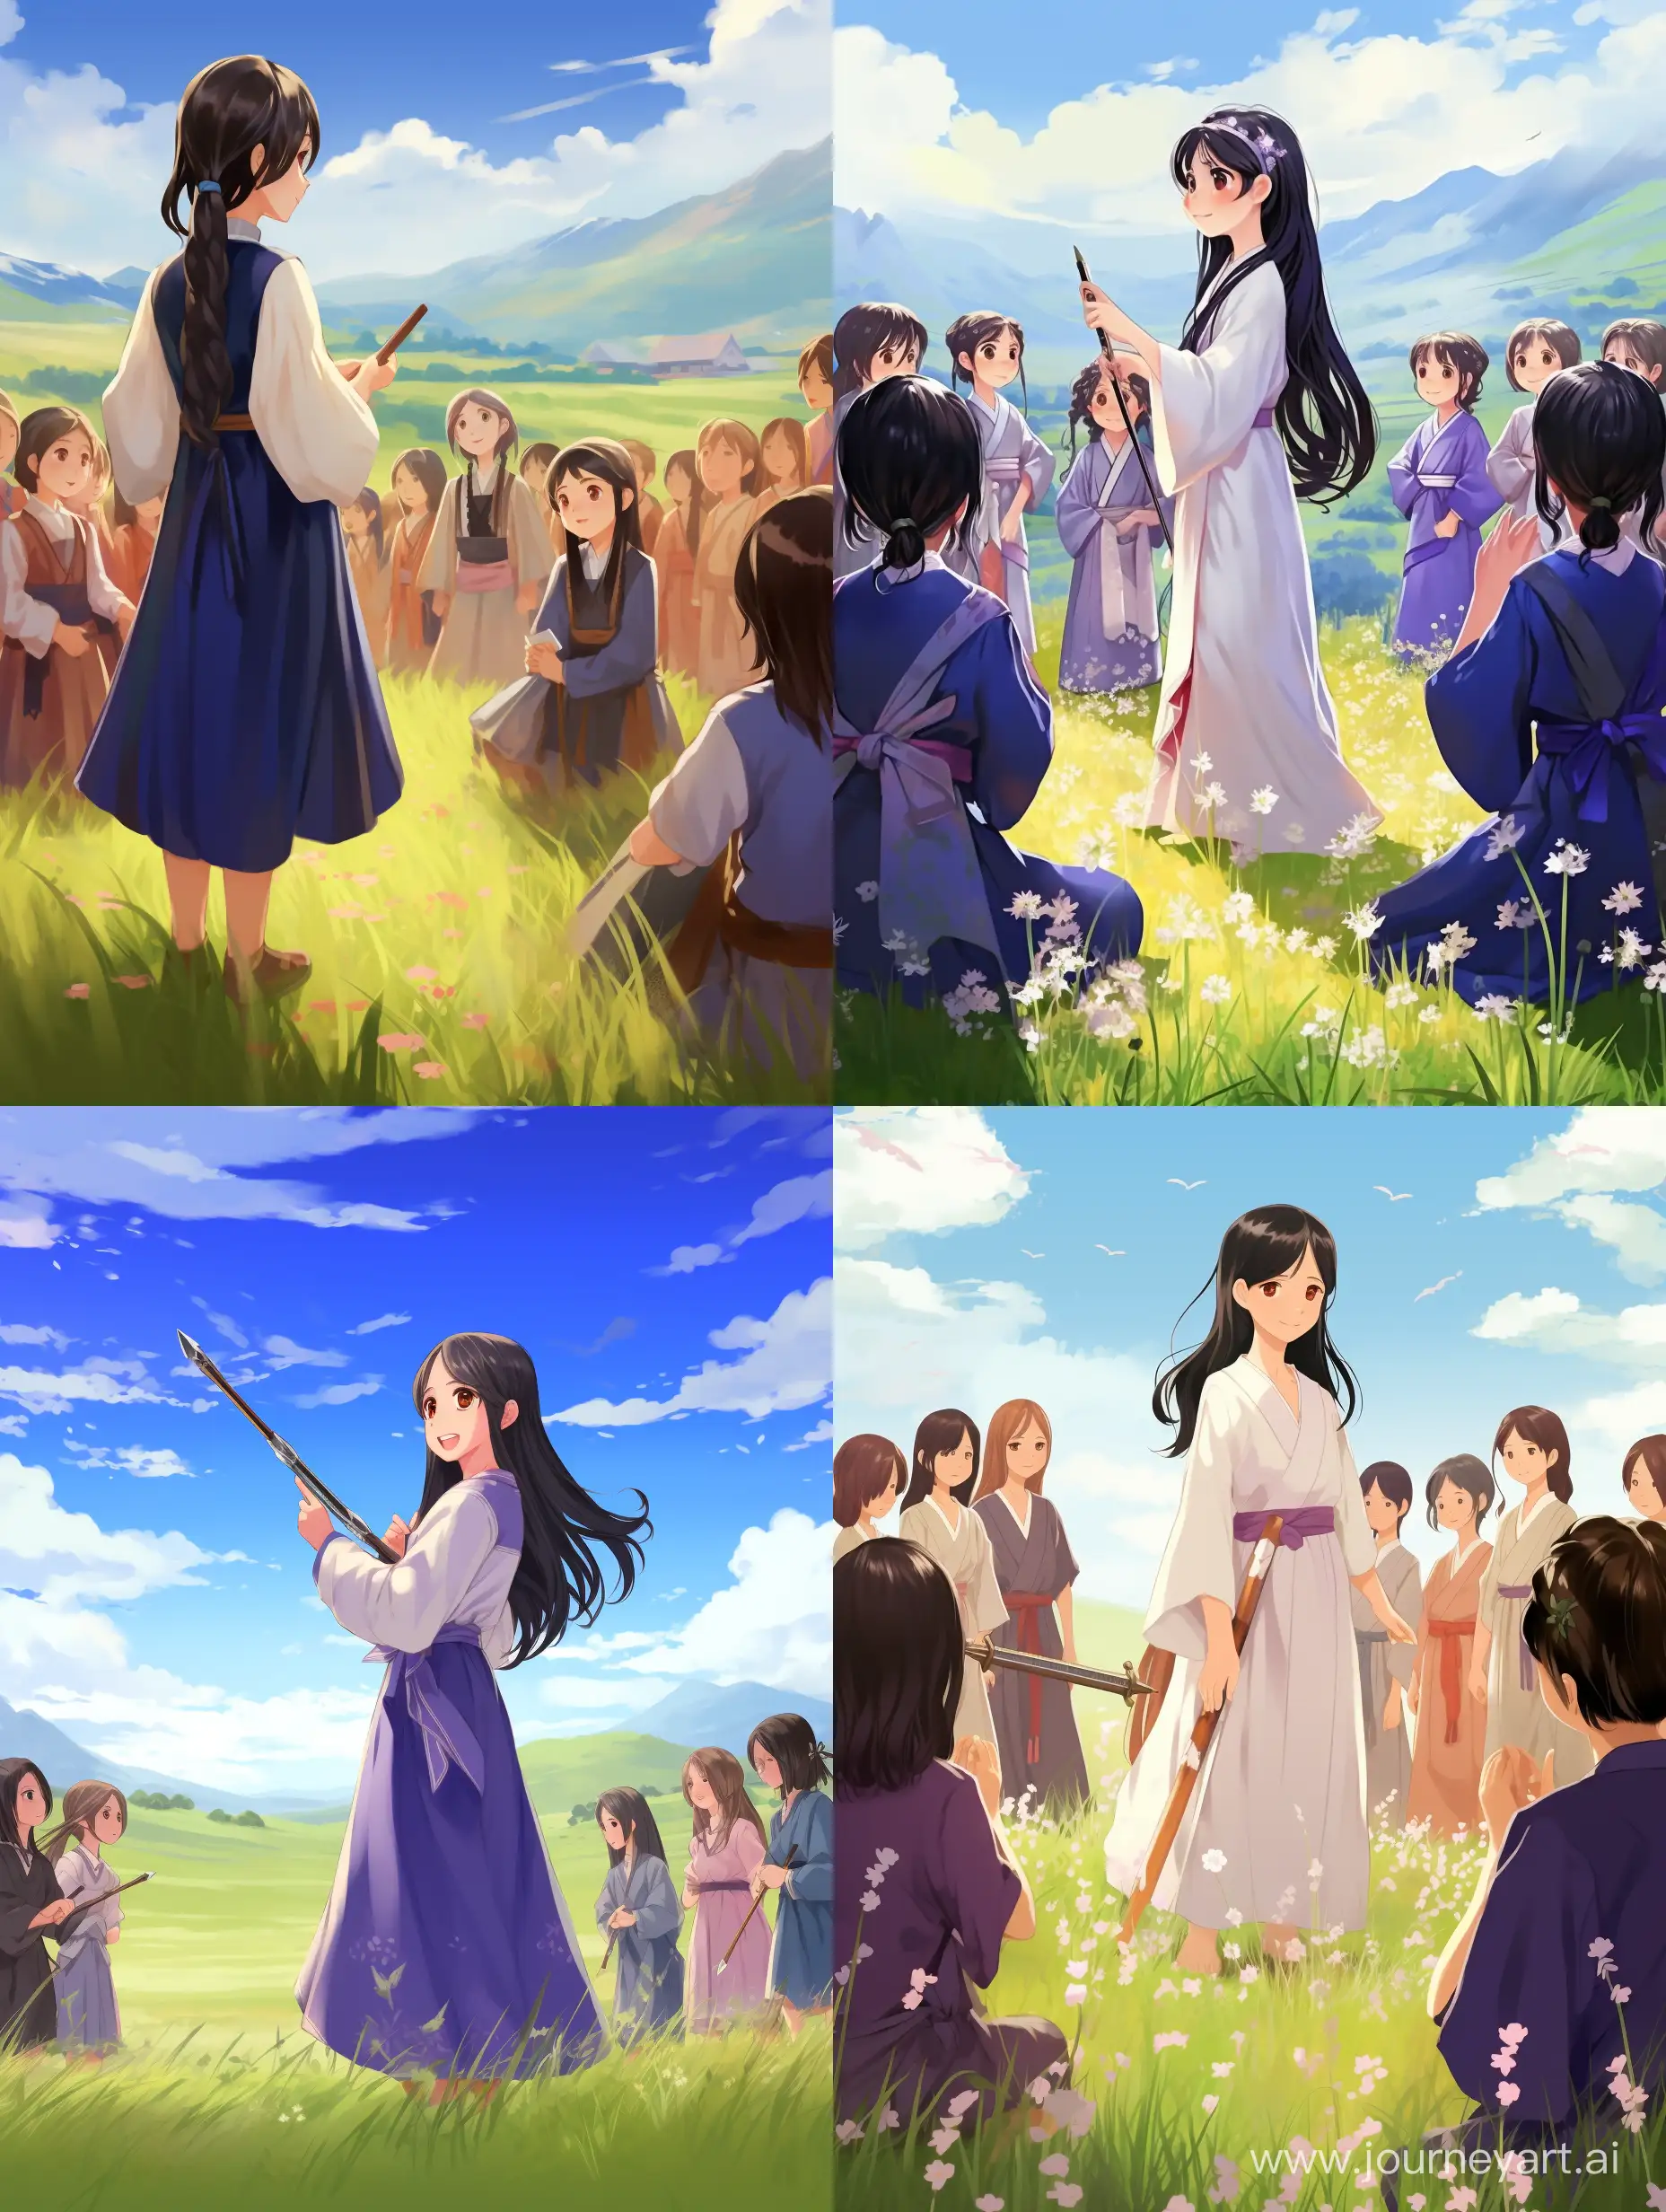 long black haired beautiful girl wears a fit clothes with a purple kimono, stands on a training field, in front of group of children students each of them wears a training traditional clothes. there is a long wooden stick in her hand, she talks to the children, a manga style art